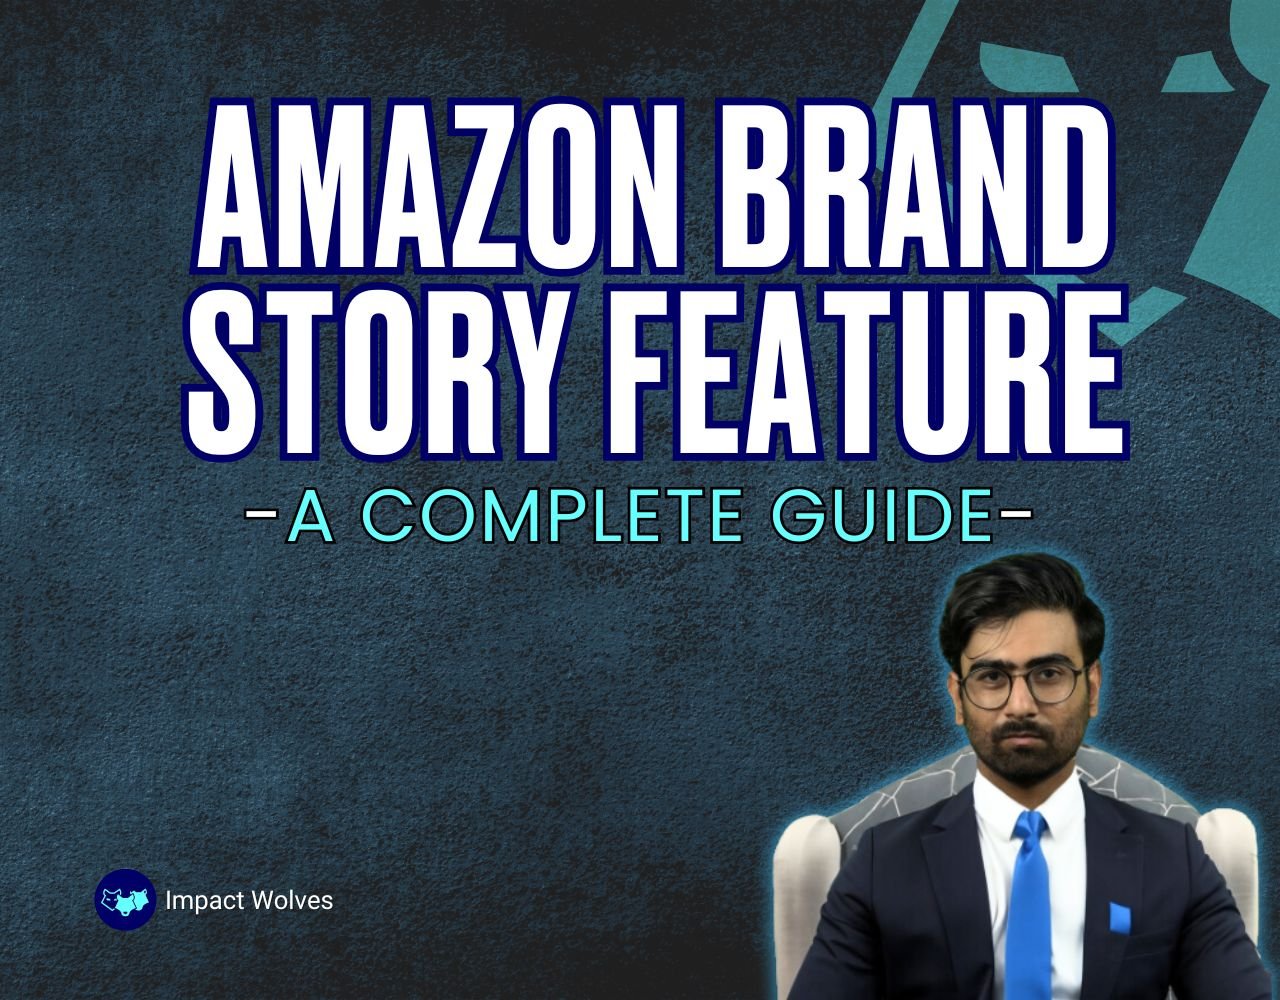 Amazon Brand story feature